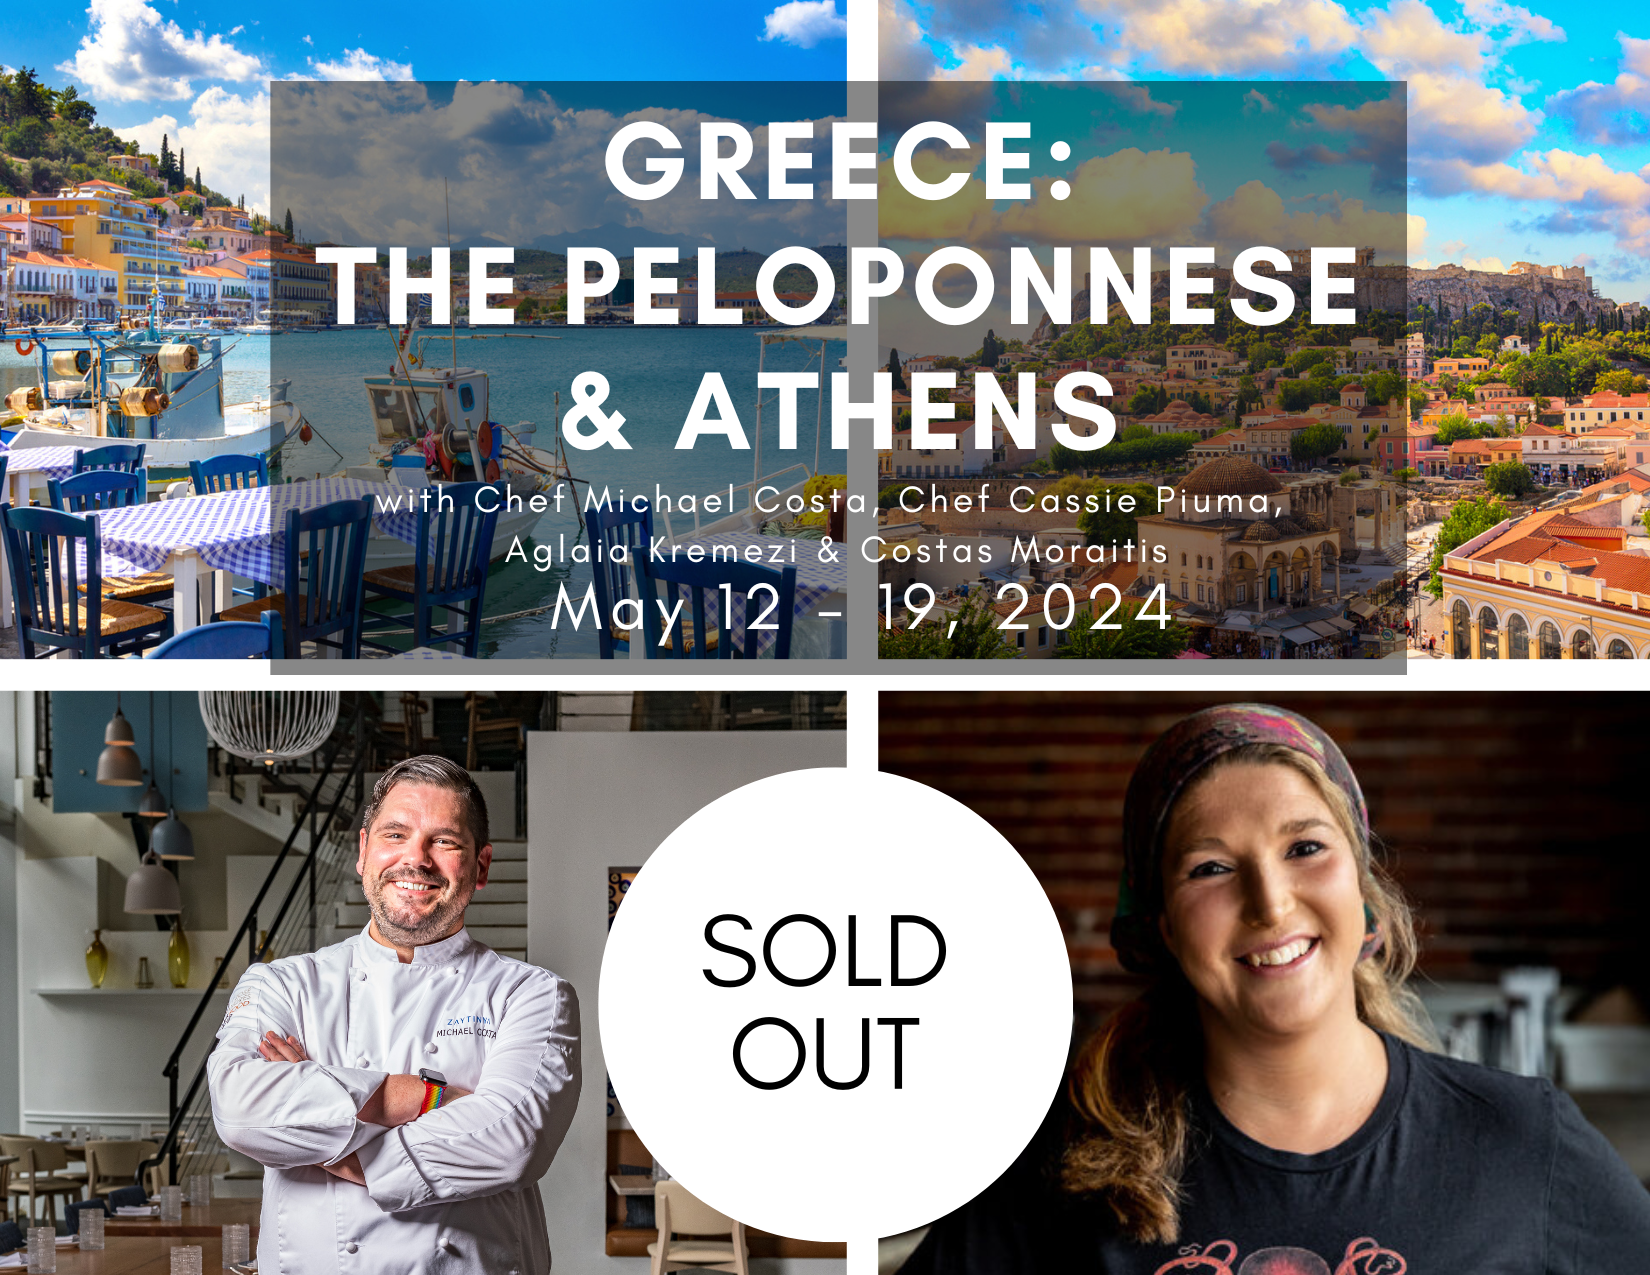 GREECE 2024 SOLD OUT